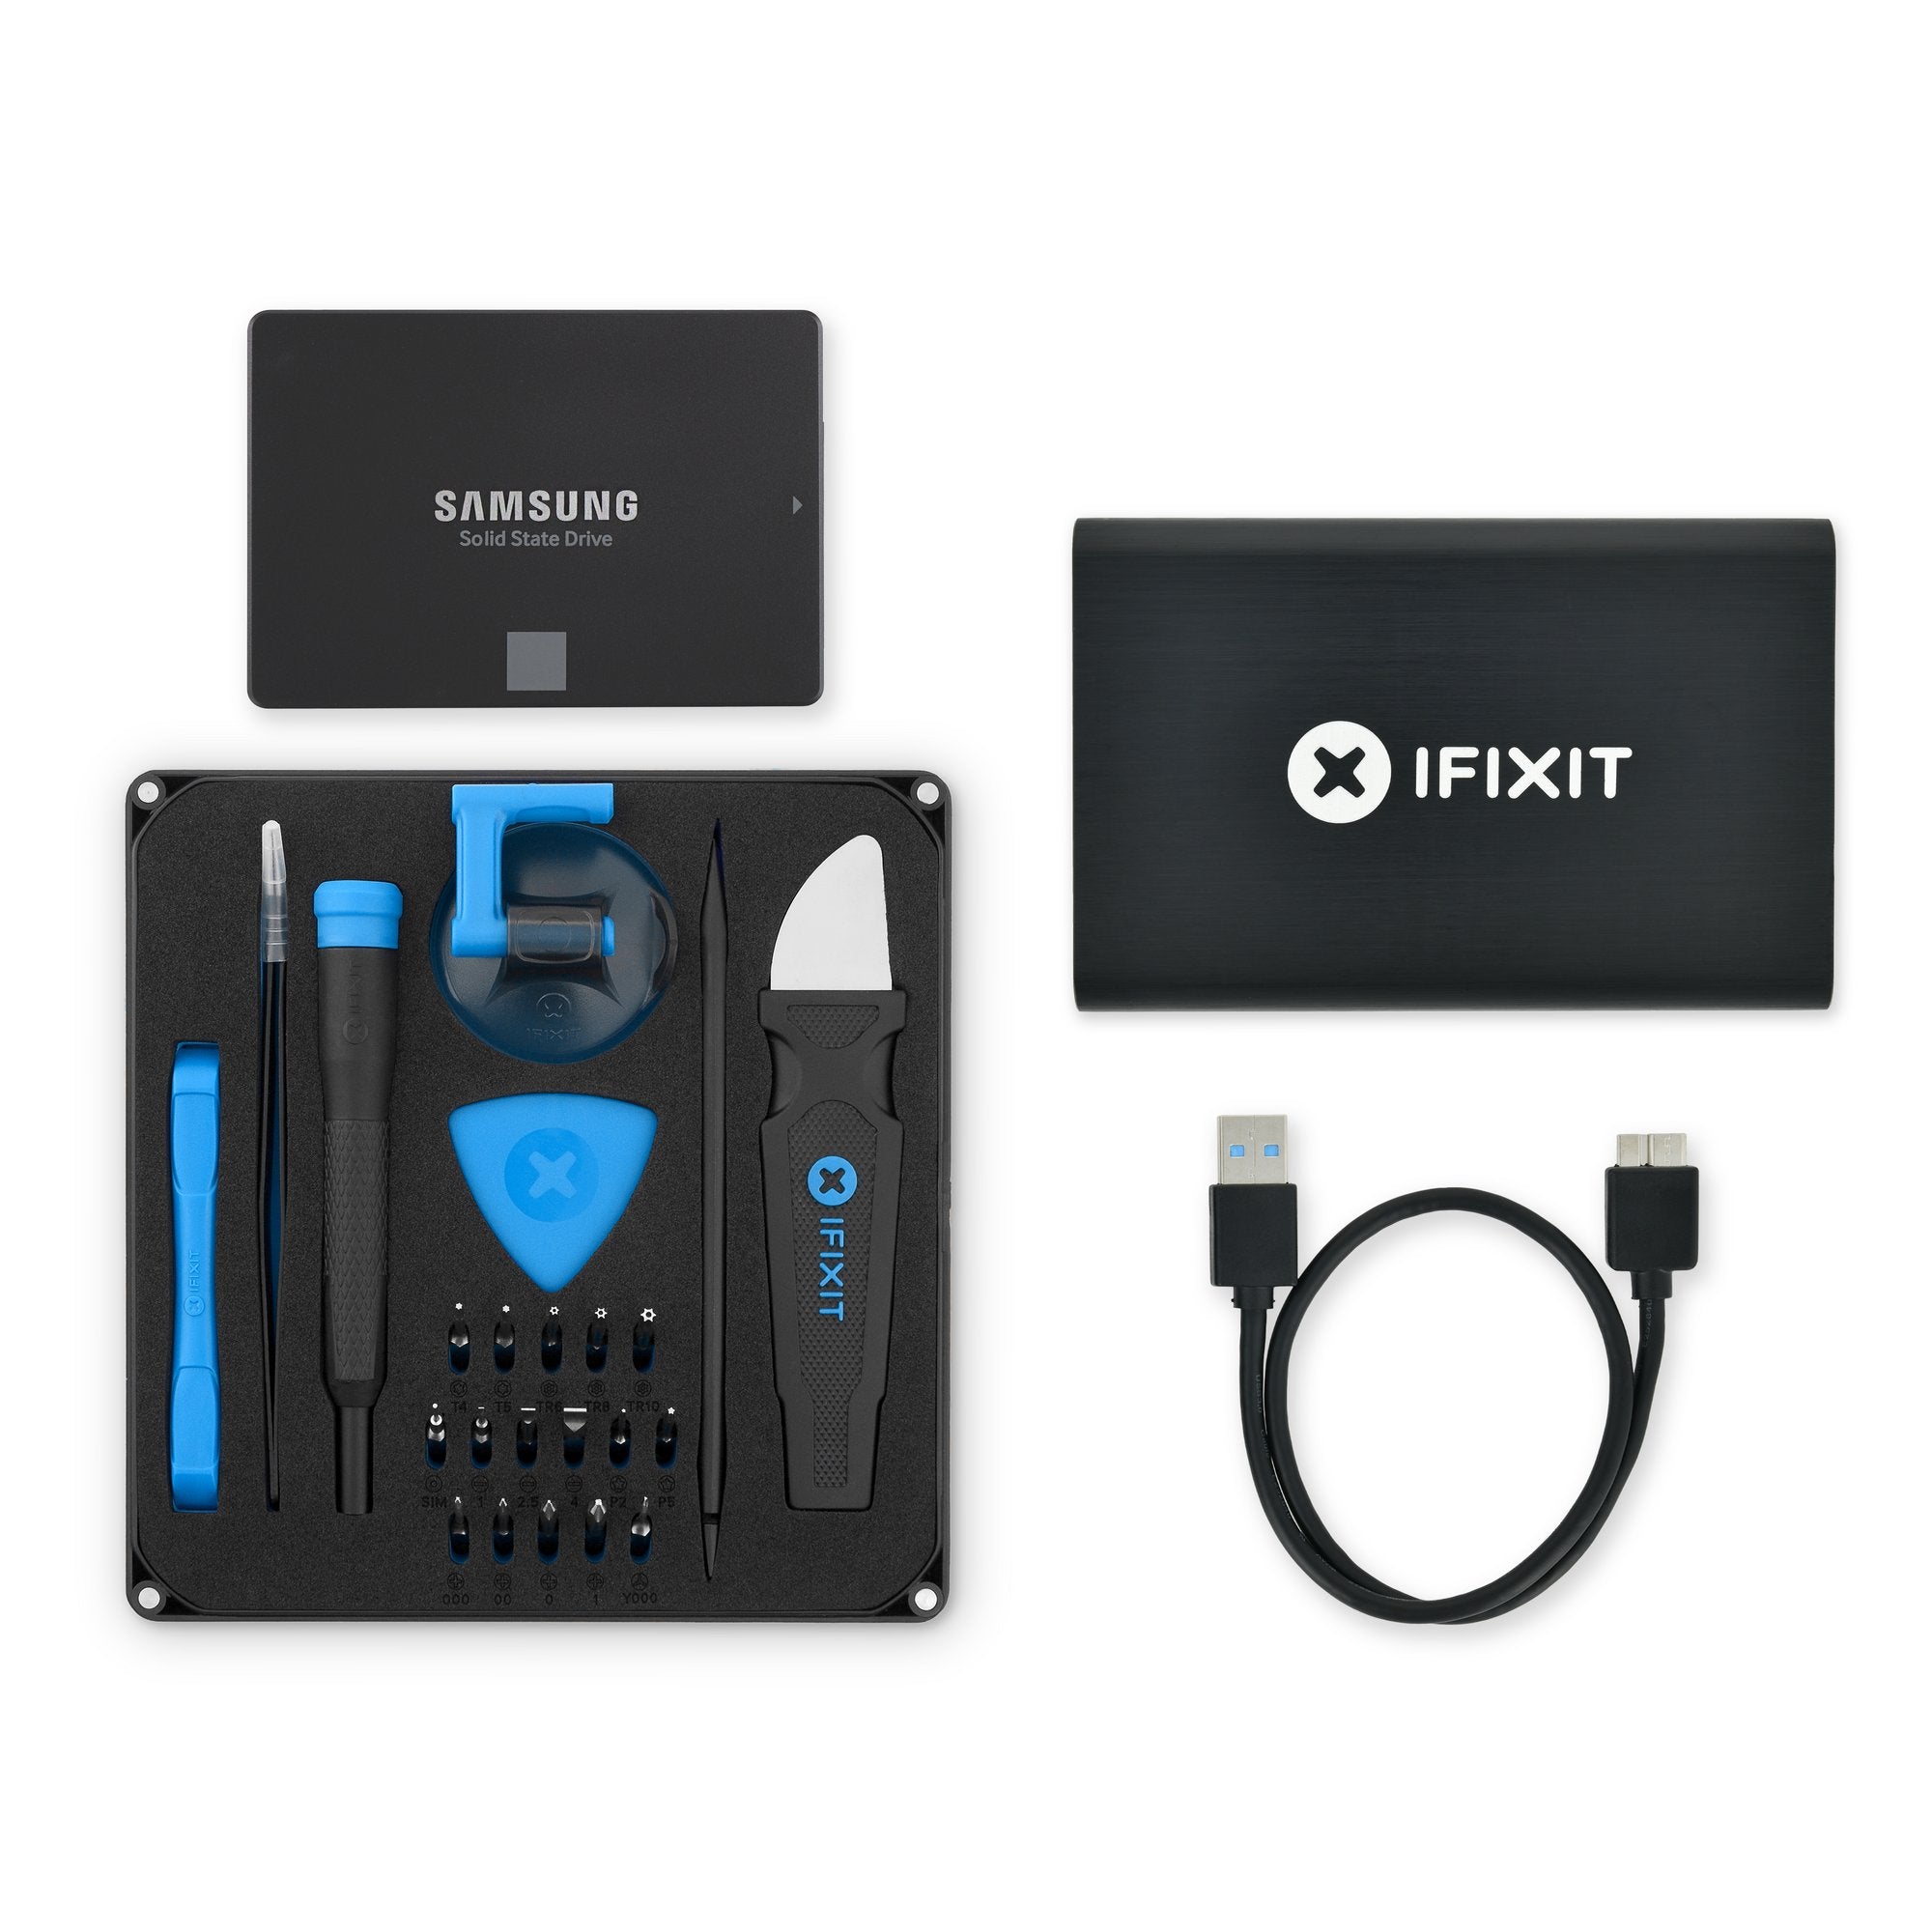 Crucial MX500 250 GB SSD—Your complete iFixit Fix Kit: a Crucial